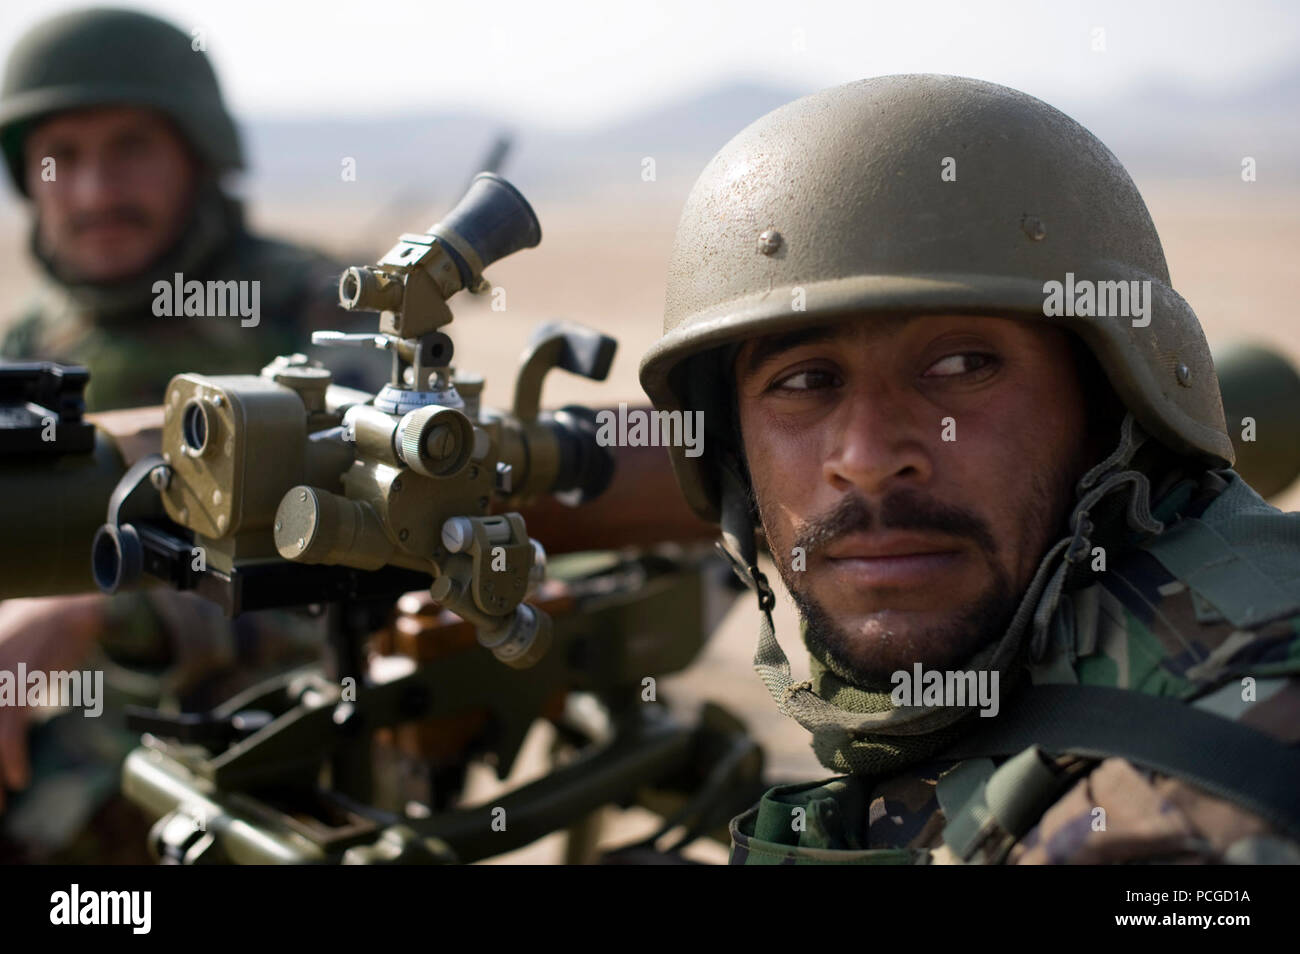 An Afghan National Army soldier sights in a SPG9 anti-tank weapon during weapons training at the Kabul Military Training Center, Jan. 30, in Kabul, Afghanistan. NTMA advisers provide guidance to Afghan National Army instructors who are charged with conducting the bulk of training for ANA recruits. Stock Photo